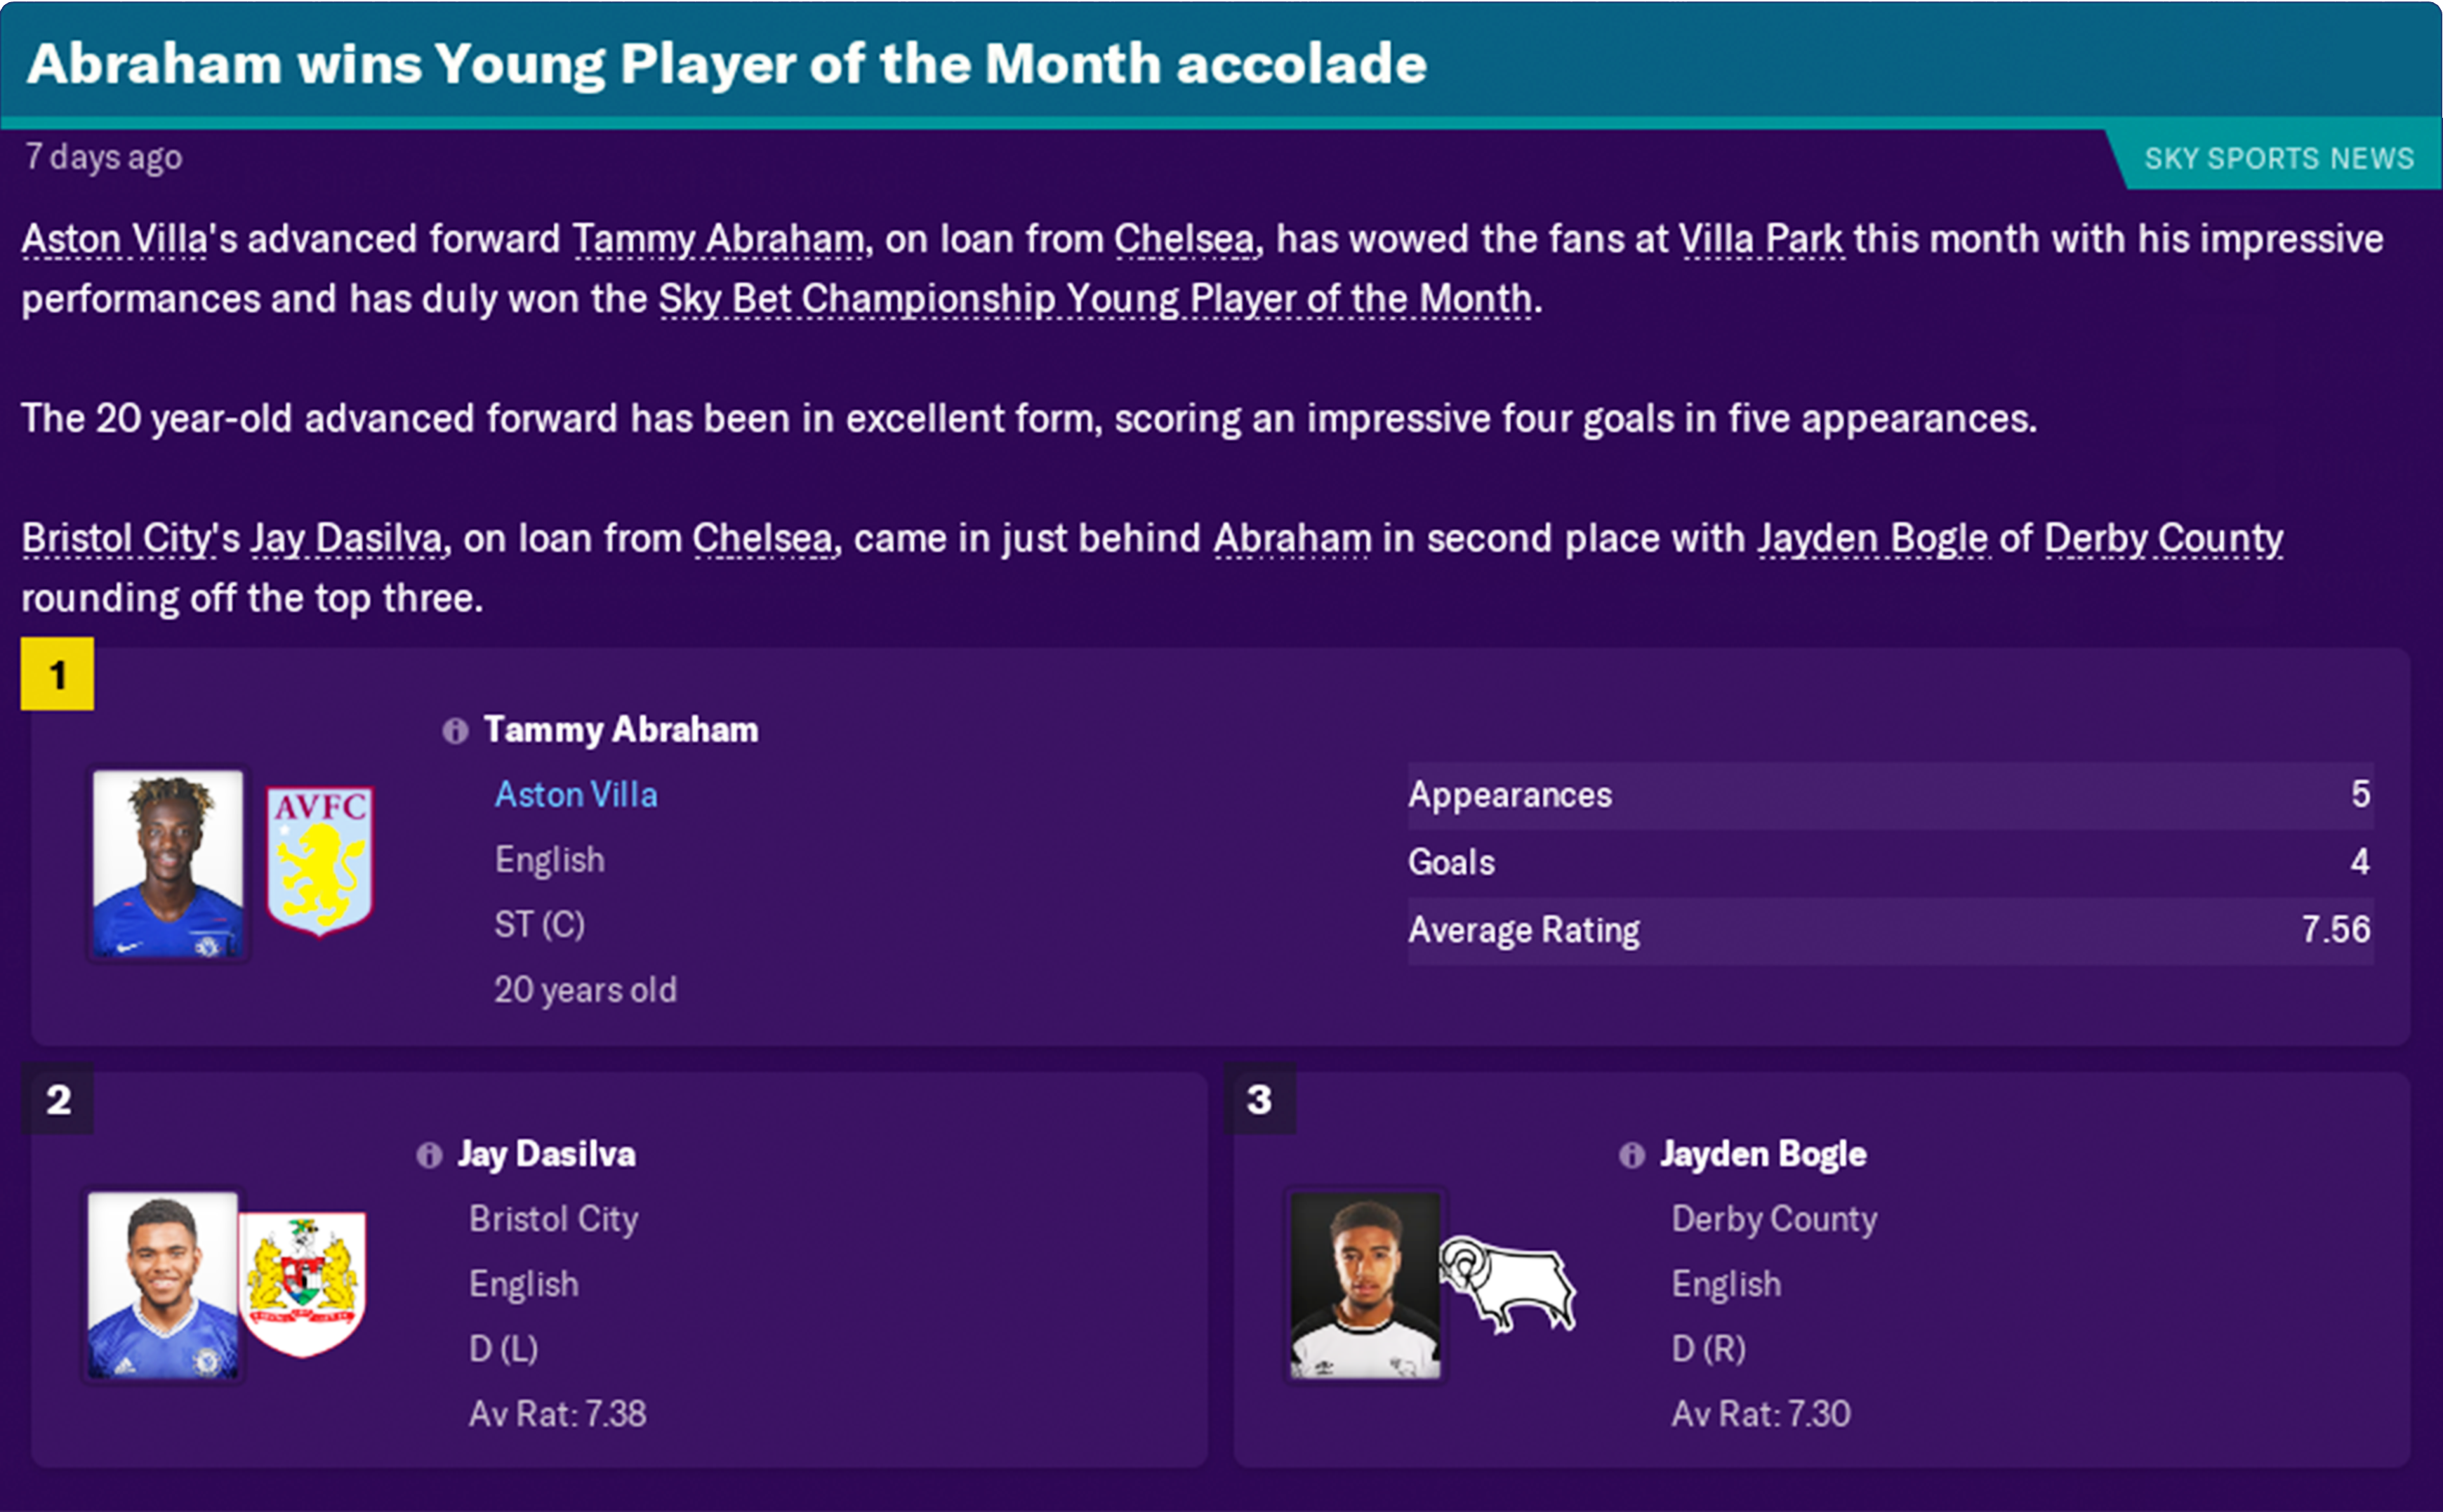 https://superclasicofc.files.wordpress.com/2018/11/tammy-young-player-of-the-month.png